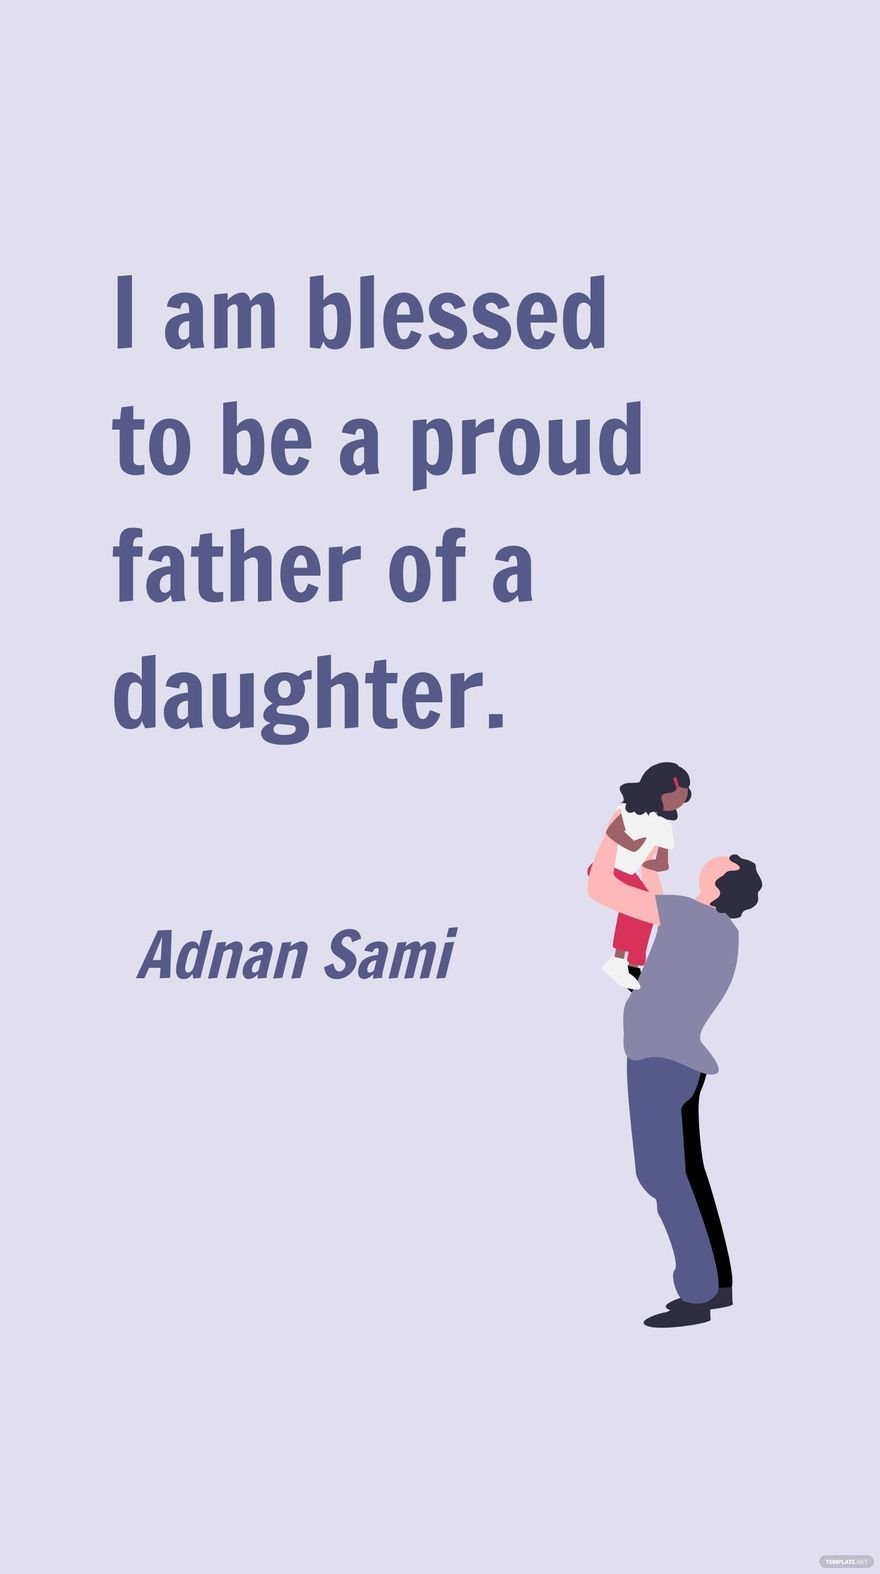 Adnan Sami - I am blessed to be a proud father of a daughter.